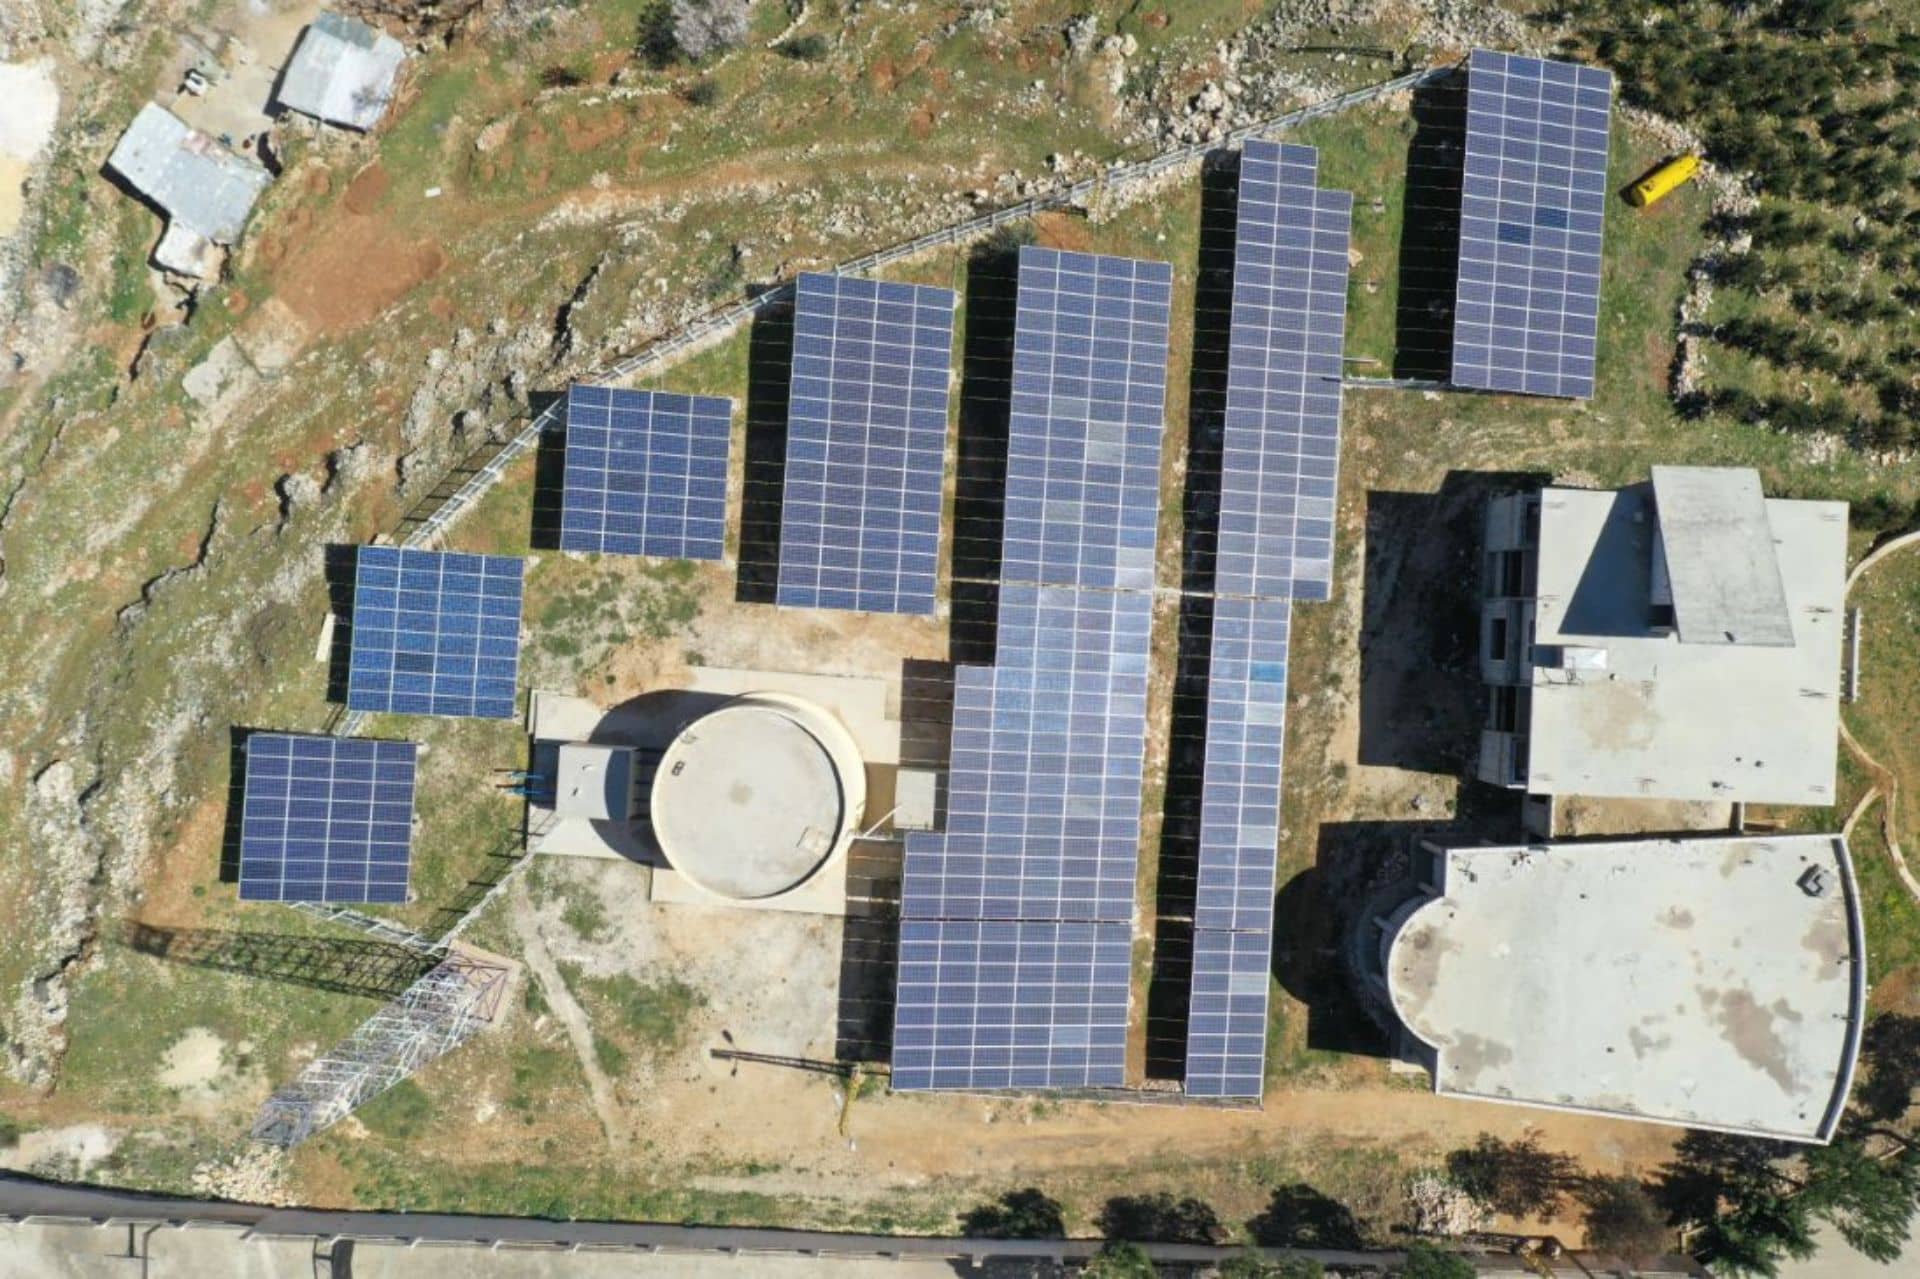 Installation of PV Solar System for Jib Jennine Waste Water Treatment Plant